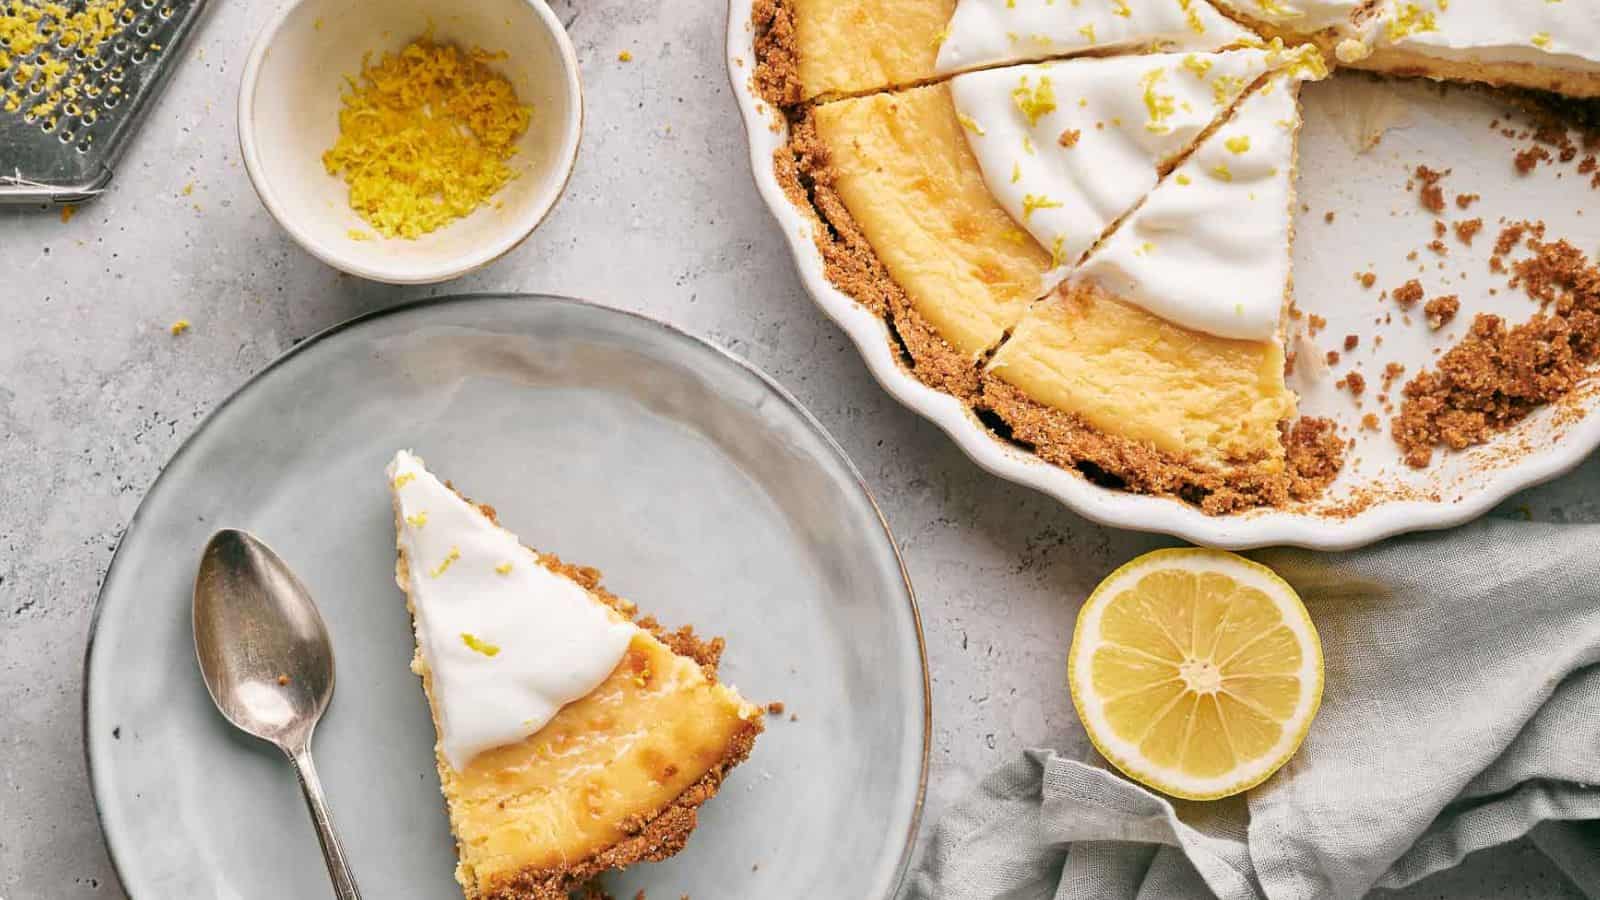 A slice of lemon pie sits on a plate next to a pie with a slice removed.